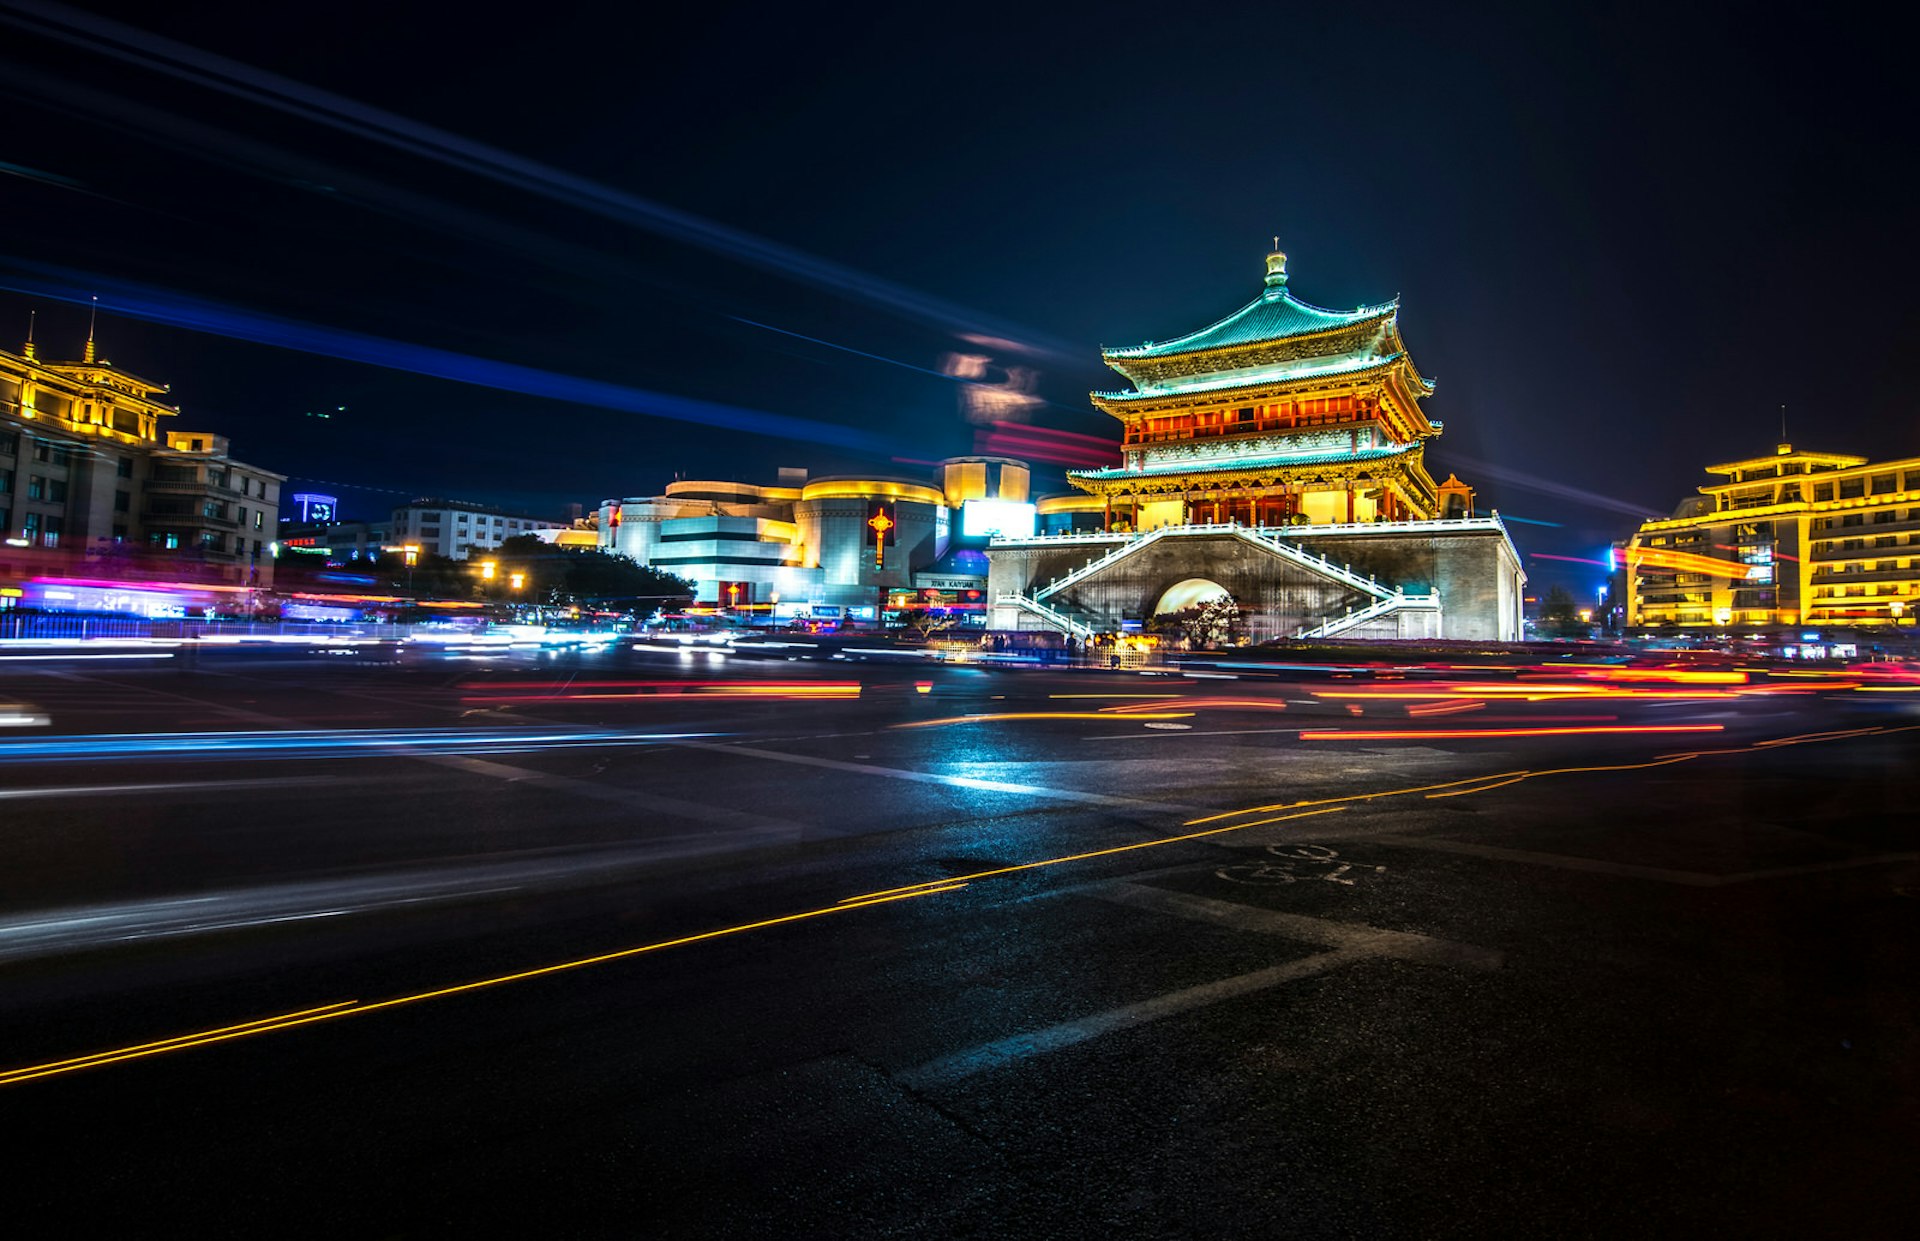 Xi'an: an exciting mix of hip and heritage © Nutexzles / Getty